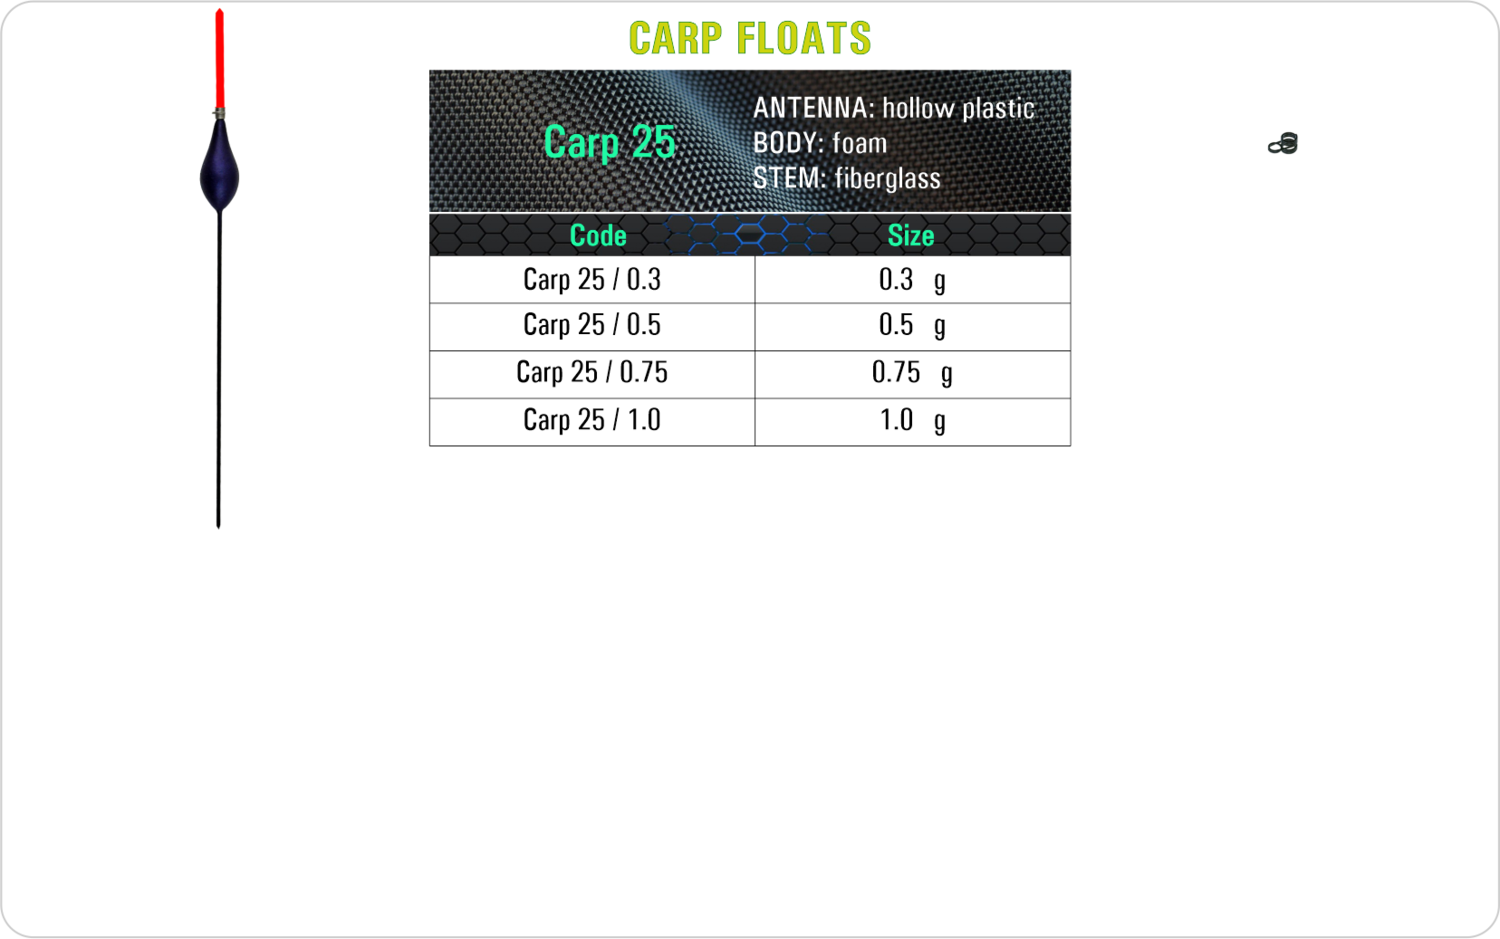 SF Carp 25 Carp float model and table containing an additional information about this float with different codes, sizes, types of the body, the stem and the antenna of the float.